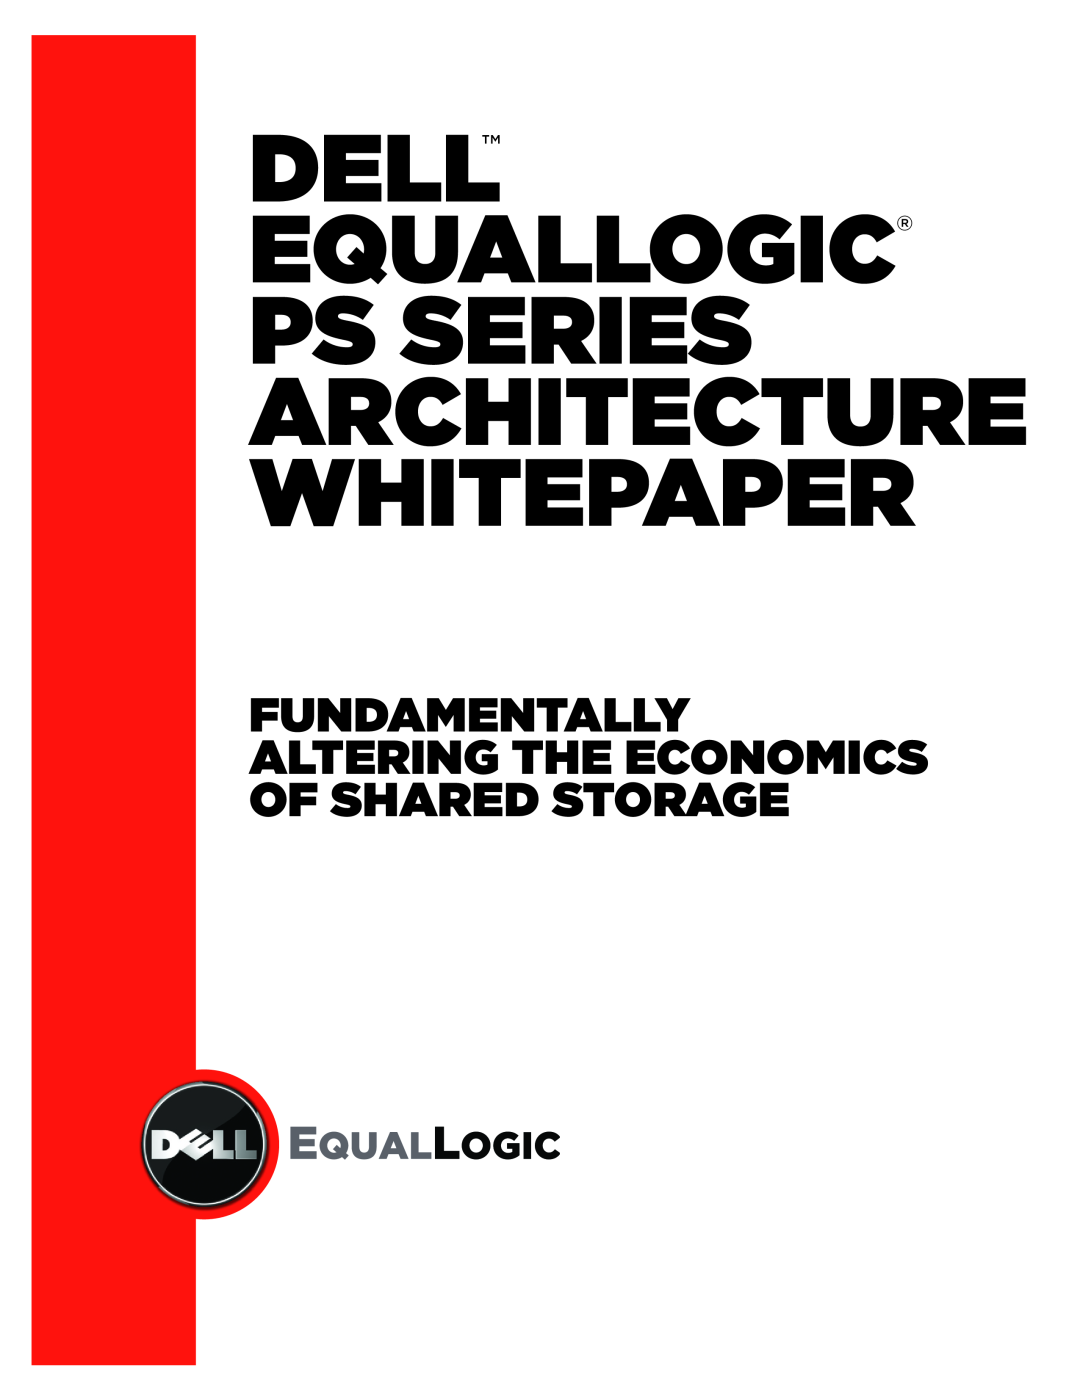 Dell manual DELL Equallogic PS Series Architecture Whitepaper, Fundamentally Altering the Economics, of Shared Storage 